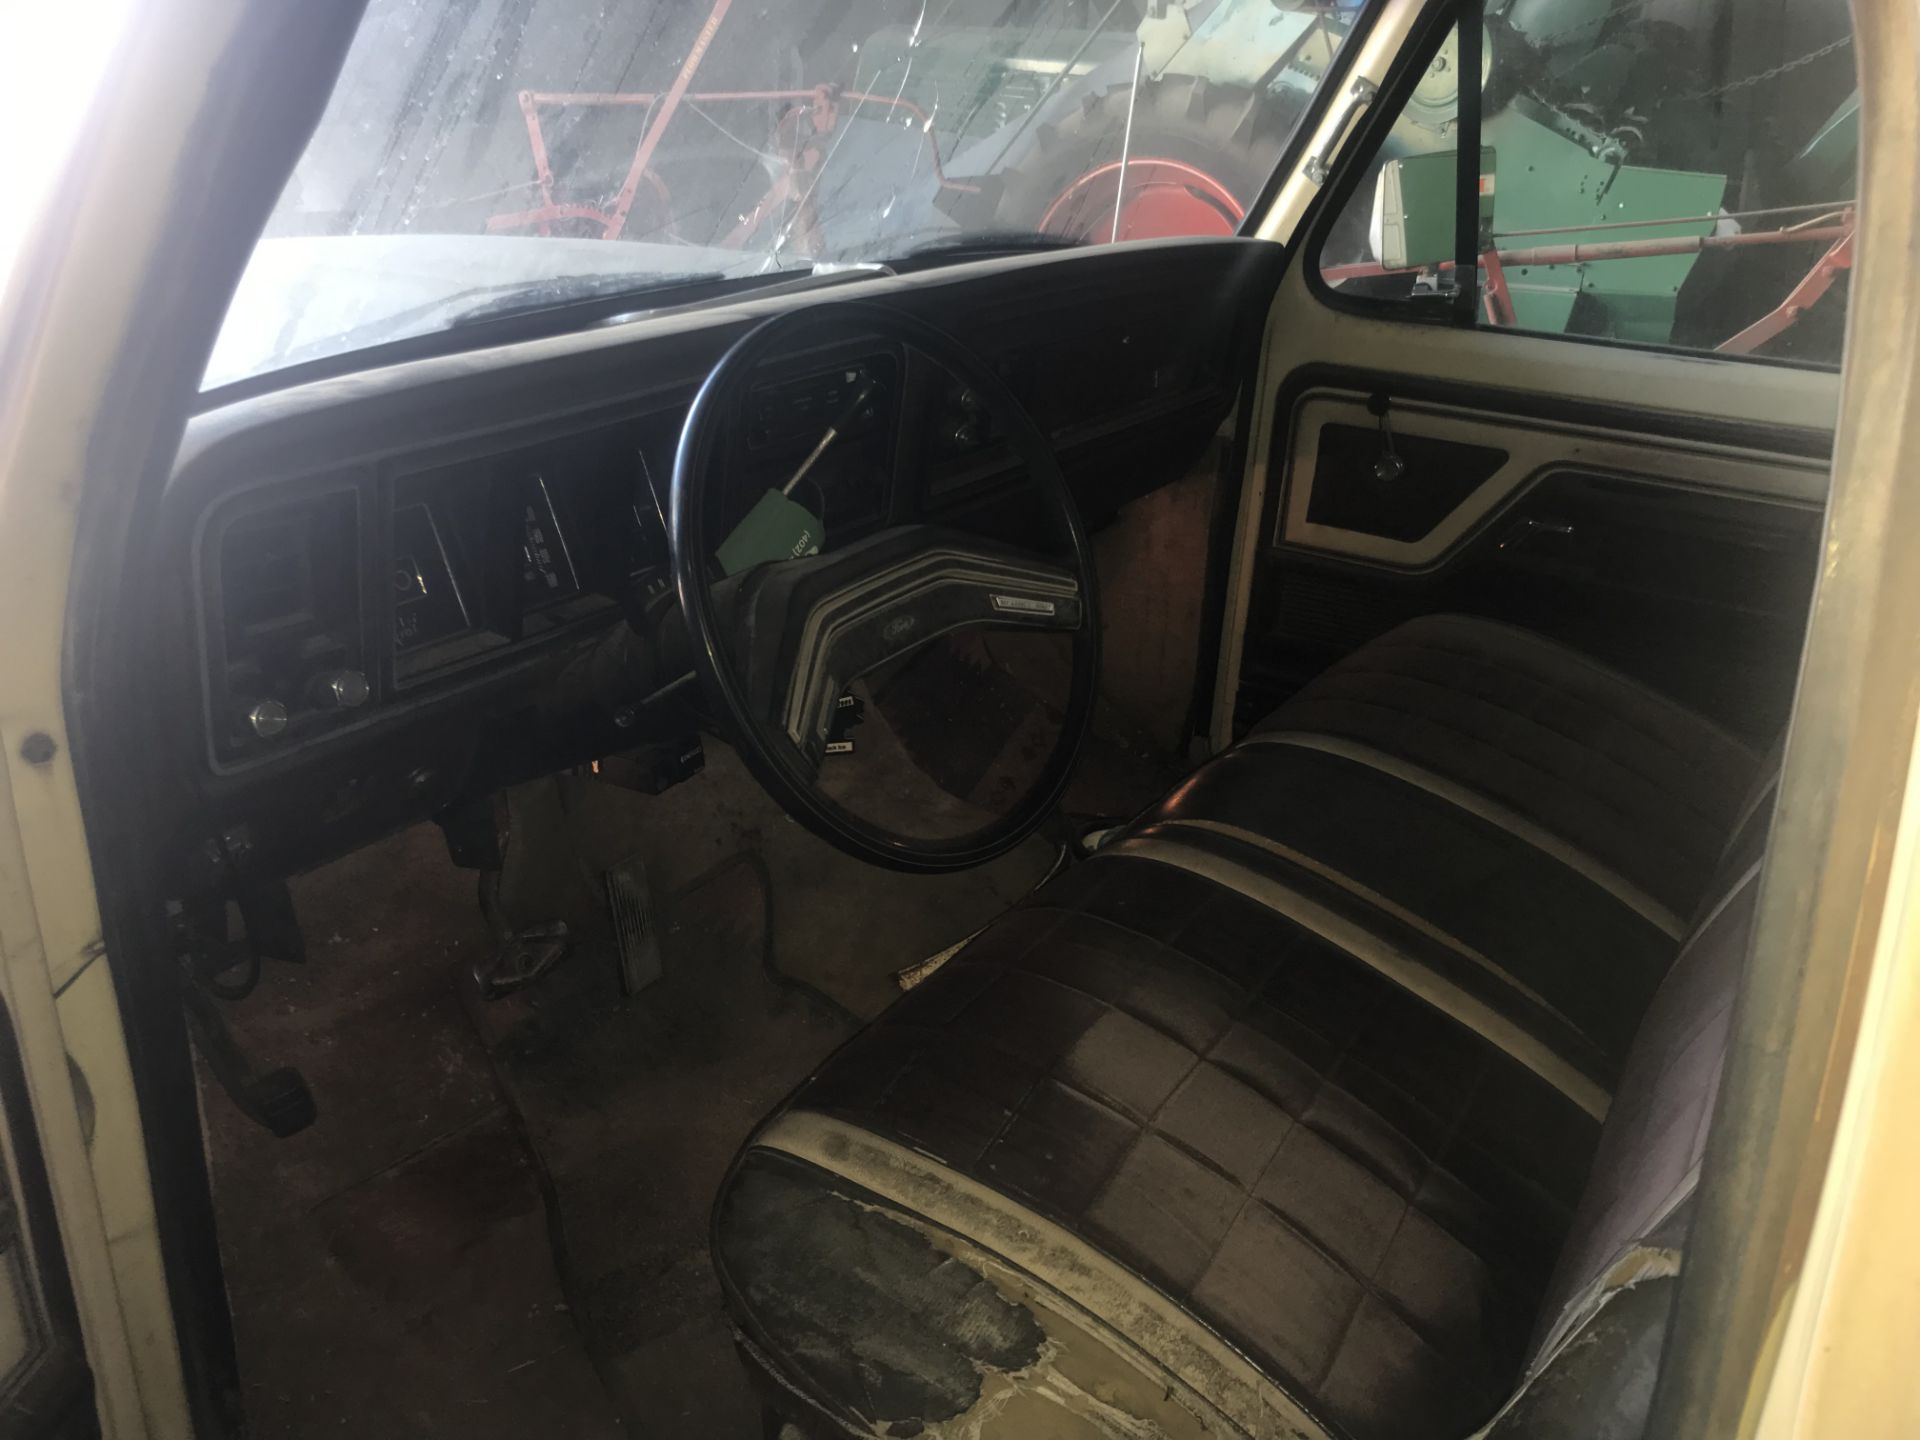 1978 Ford Lariat F-150 2wd, 400 V-8, C7Auto, Posi, AC, Air Comp, LP/Gas (one owner) - Image 3 of 4